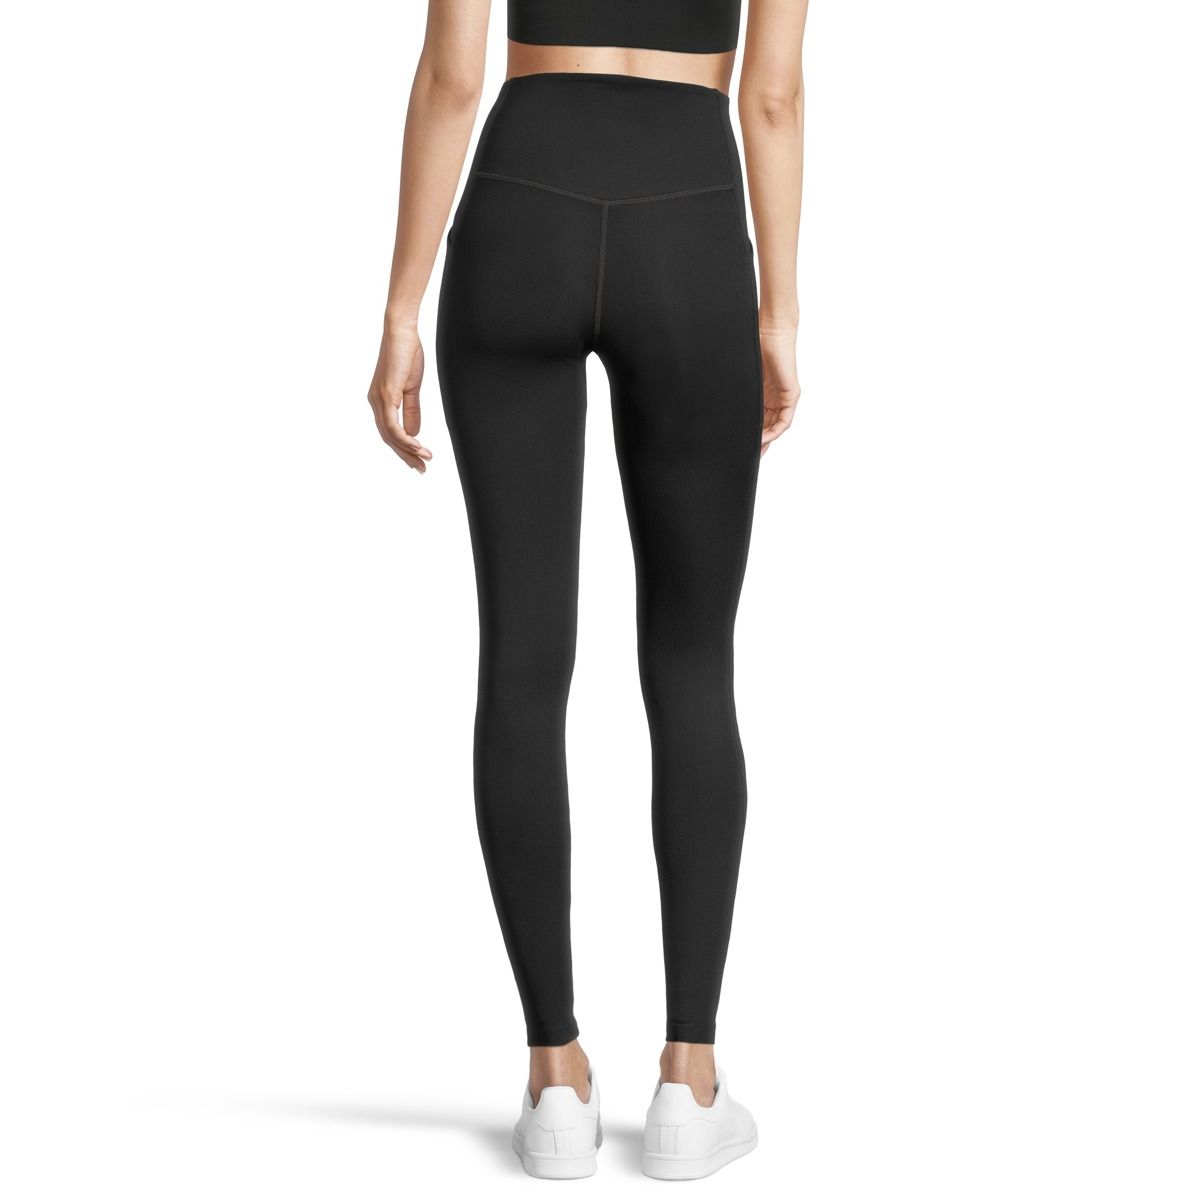 https://media-www.atmosphere.ca/product/div-03-softgoods/dpt-70-athletic-clothing/sdpt-02-womens/333554400/gf-collective-hr-pkt-comp-leg-black-l--b72f606b-f4f3-4f69-bda8-ec30b92225db-jpgrendition.jpg?imdensity=1&imwidth=1244&impolicy=mZoom